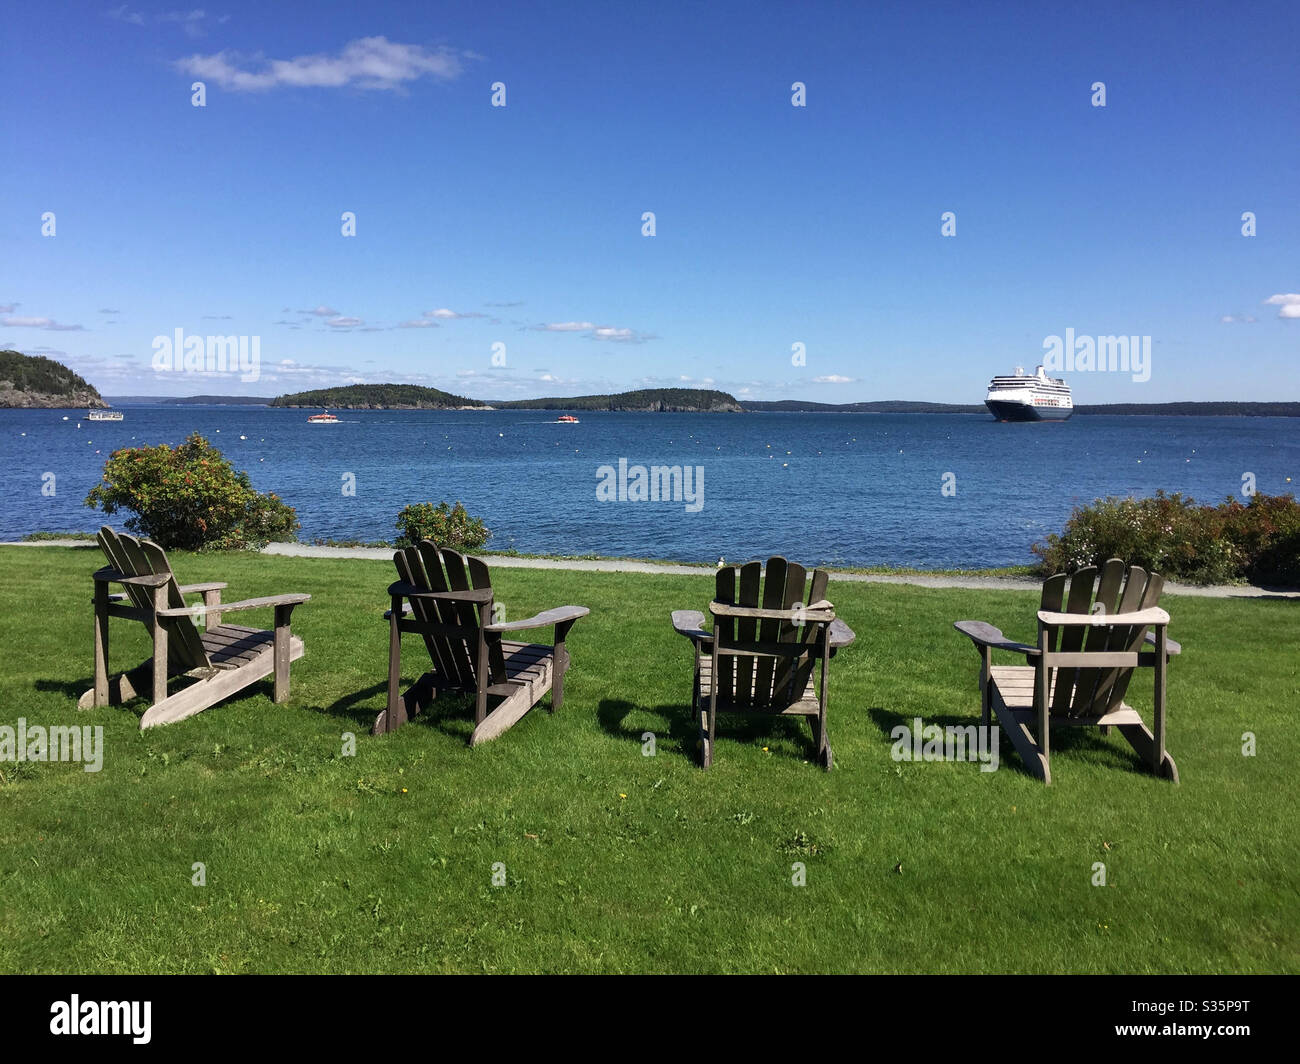 Landscape with four Adirondack chairs on a lawn overlooking the ocean and a cruise ship in the distance Stock Photo